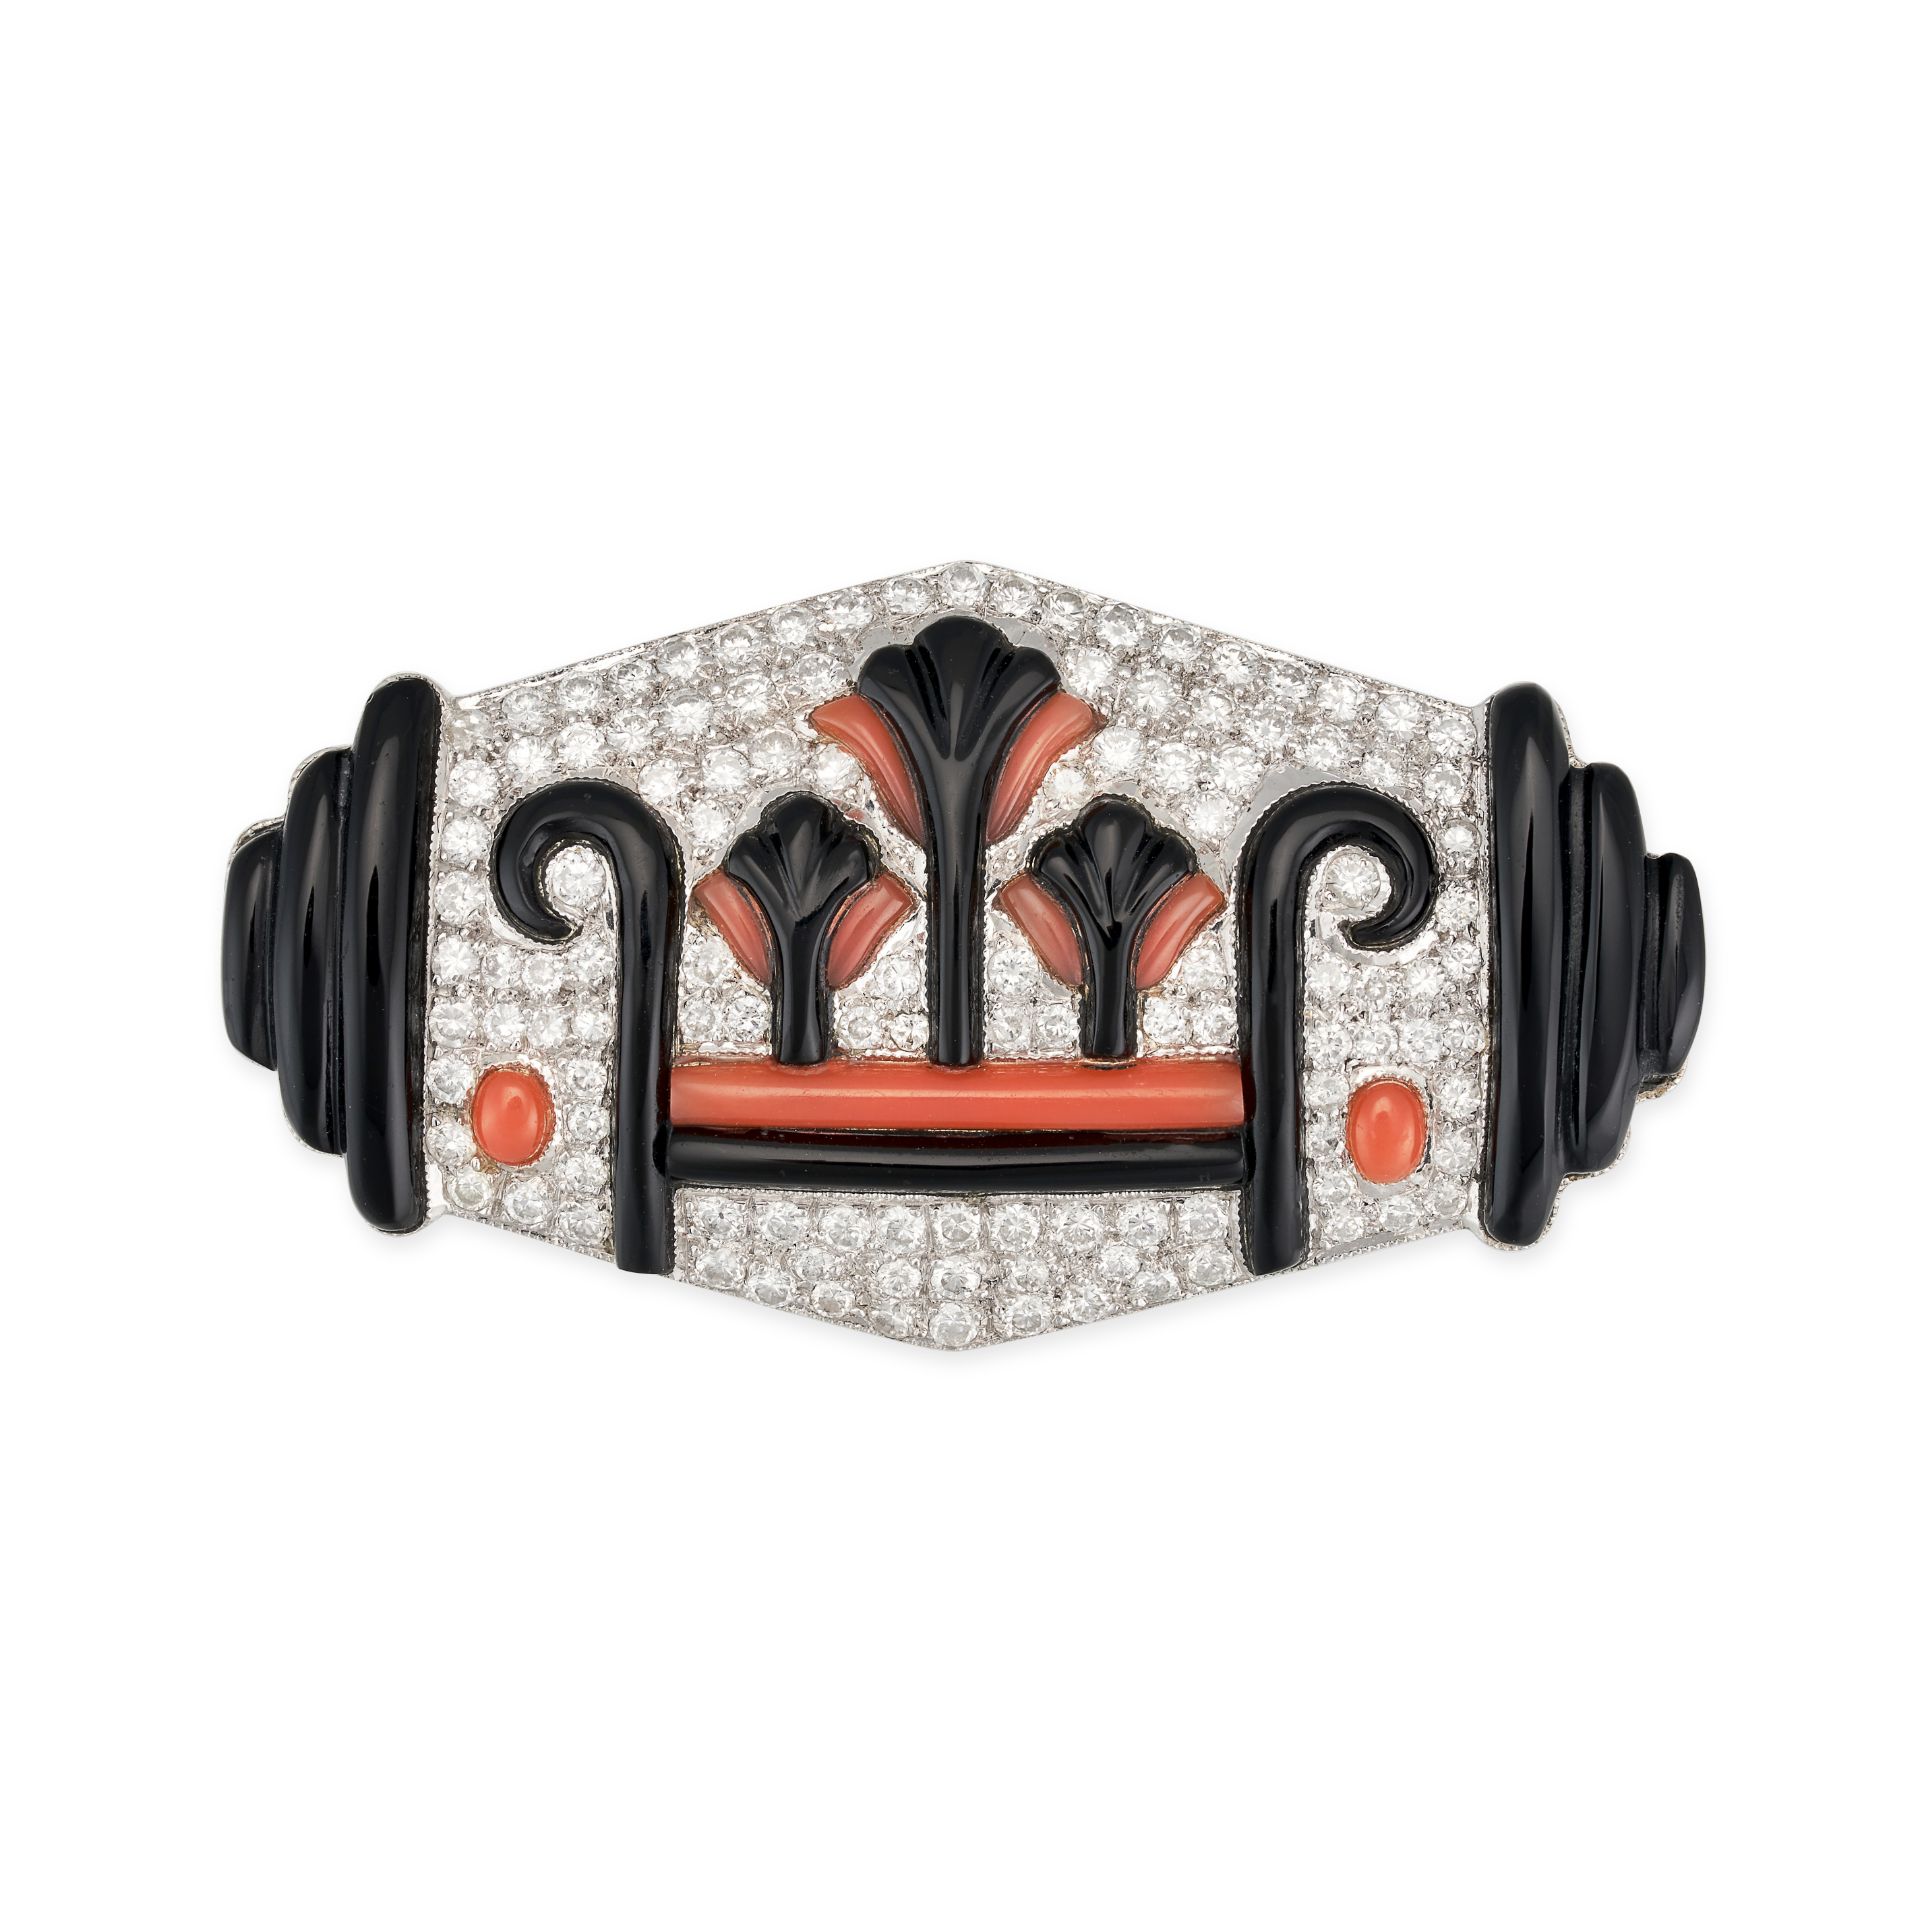 A CORAL, ONYX AND DIAMOND BROOCH in white gold, the geometric brooch set throughout with round br...